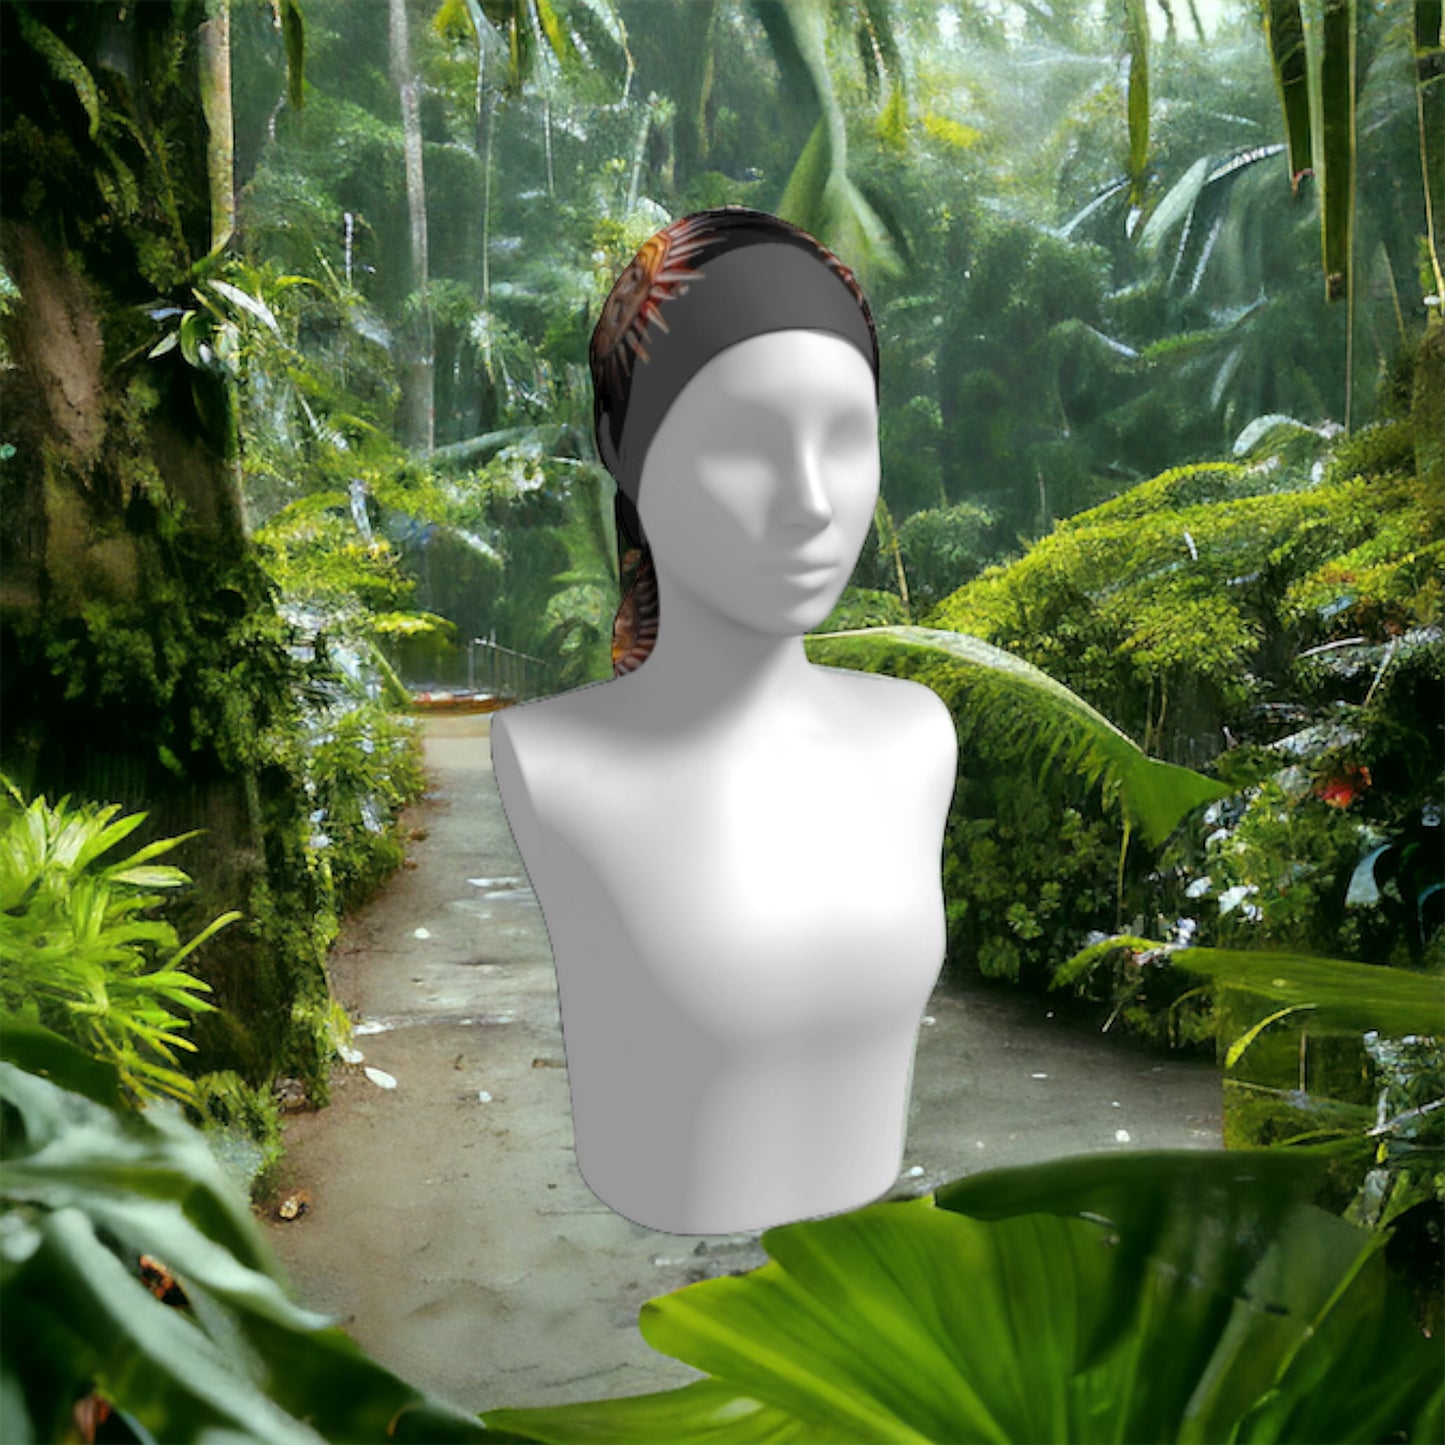 Sun Mask long scarf shown with a rainforest background.